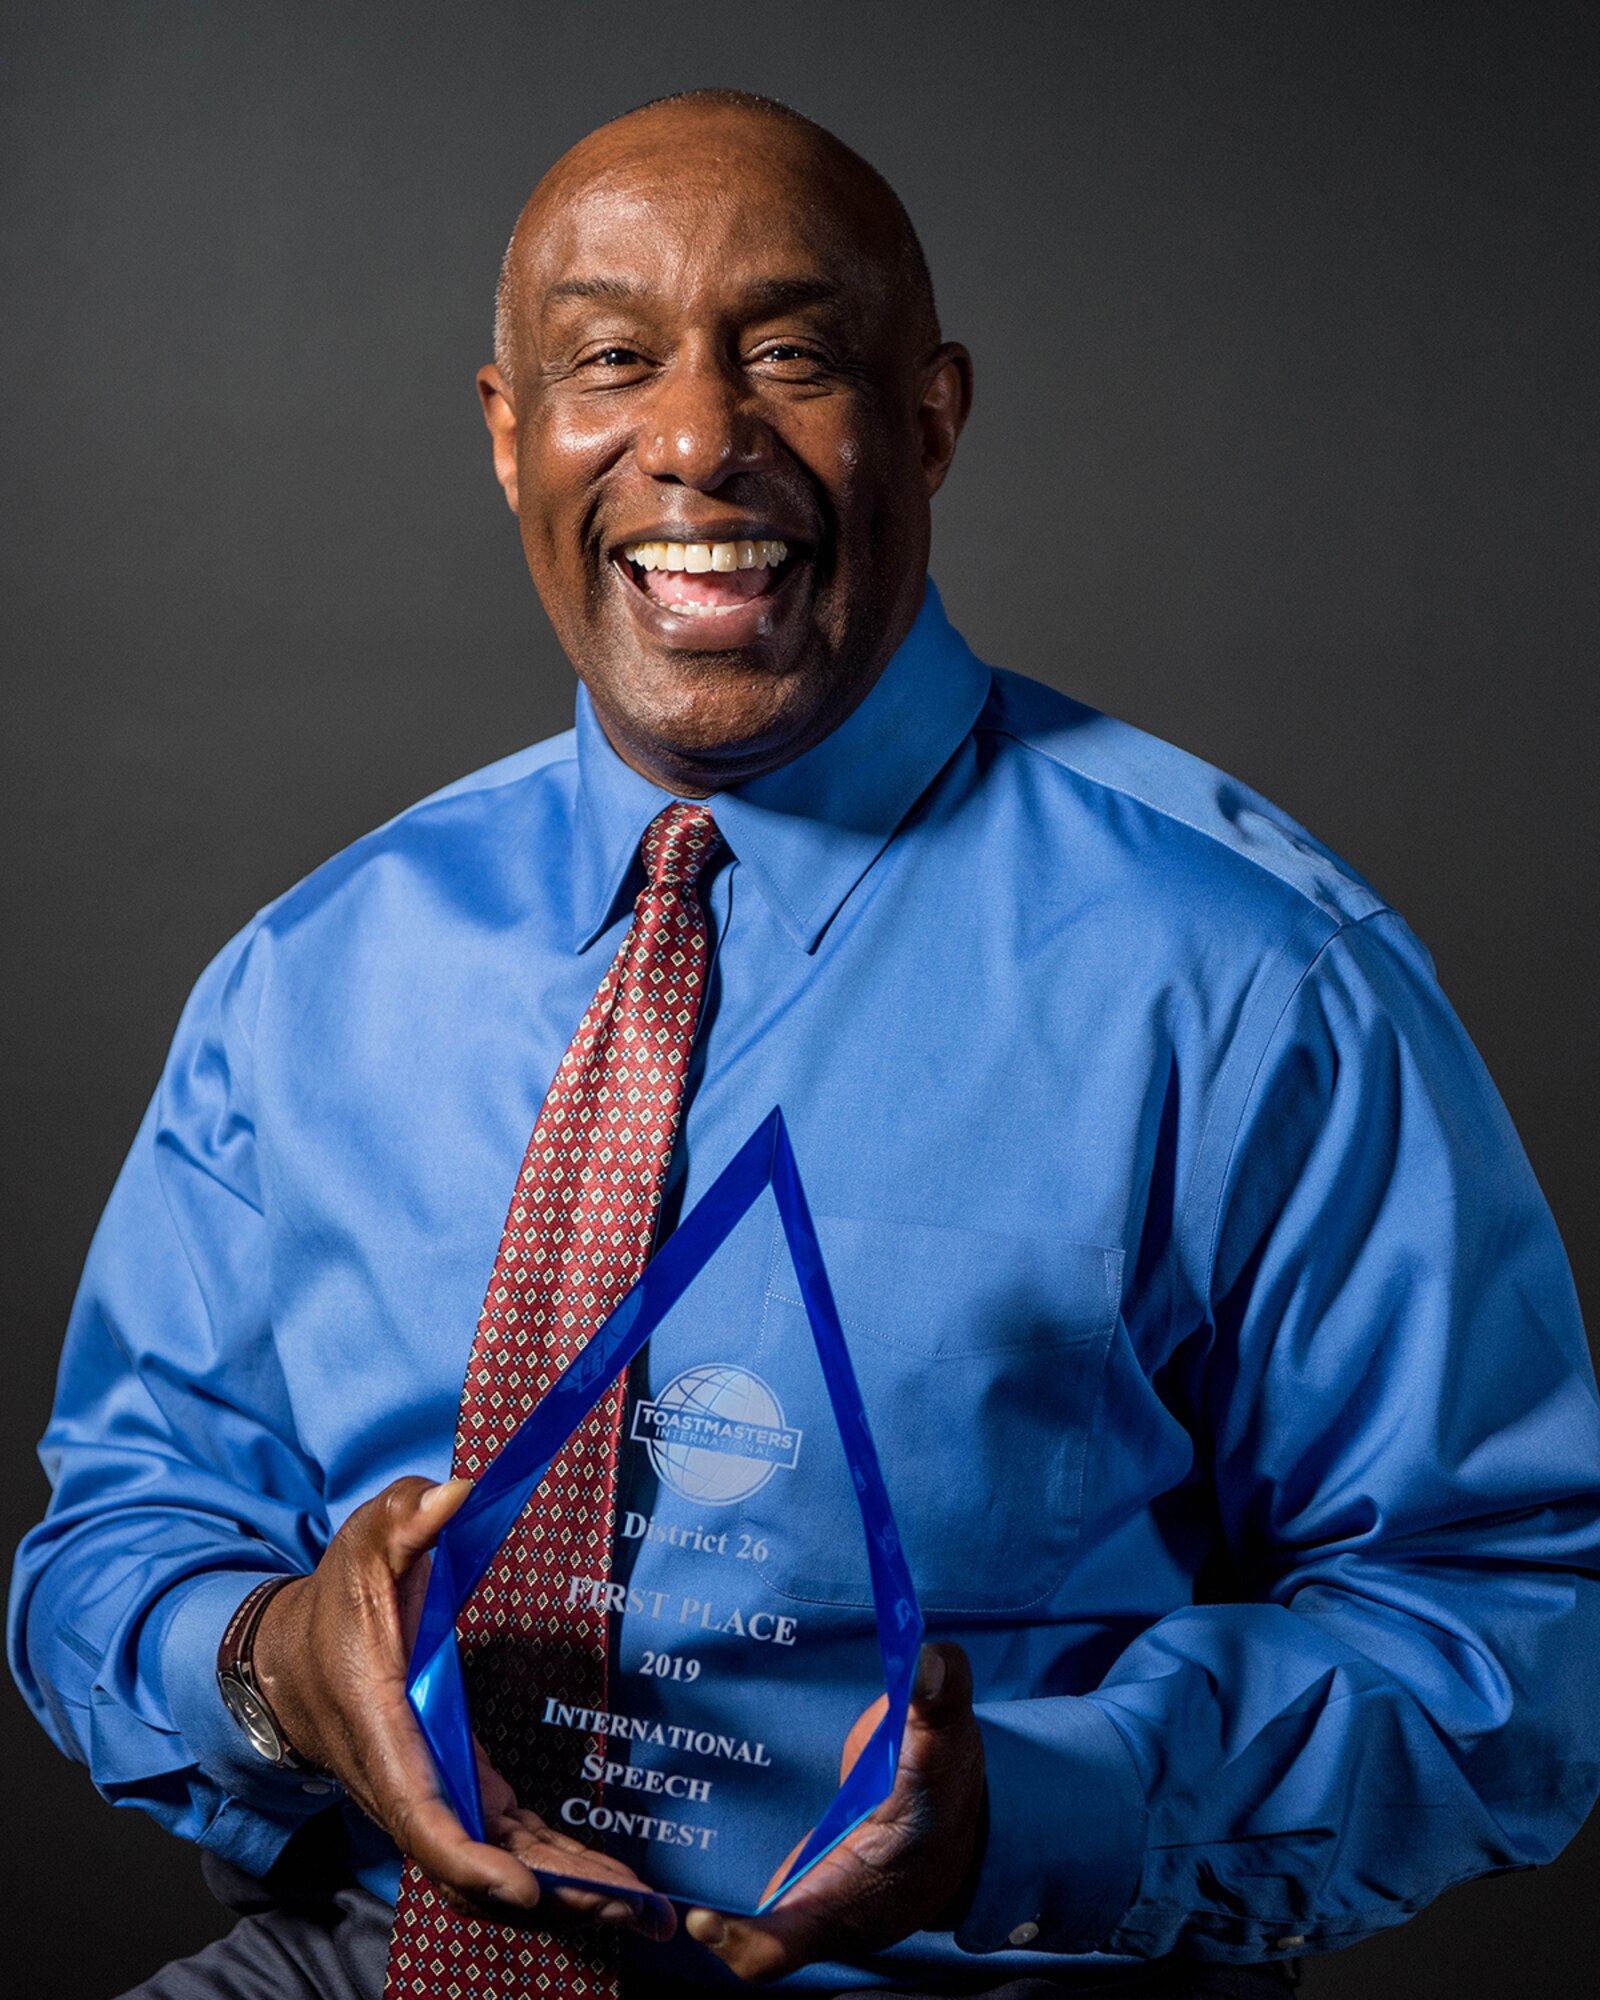 Greg Williams, legislative liaison at Headquarters, Air Force Space Command, poses with his Toastmasters International District 26 first place trophy at Peterson Air Force Base, Colorado, May 9, 2019. (U.S. Air Force photo by Amber Whittington)